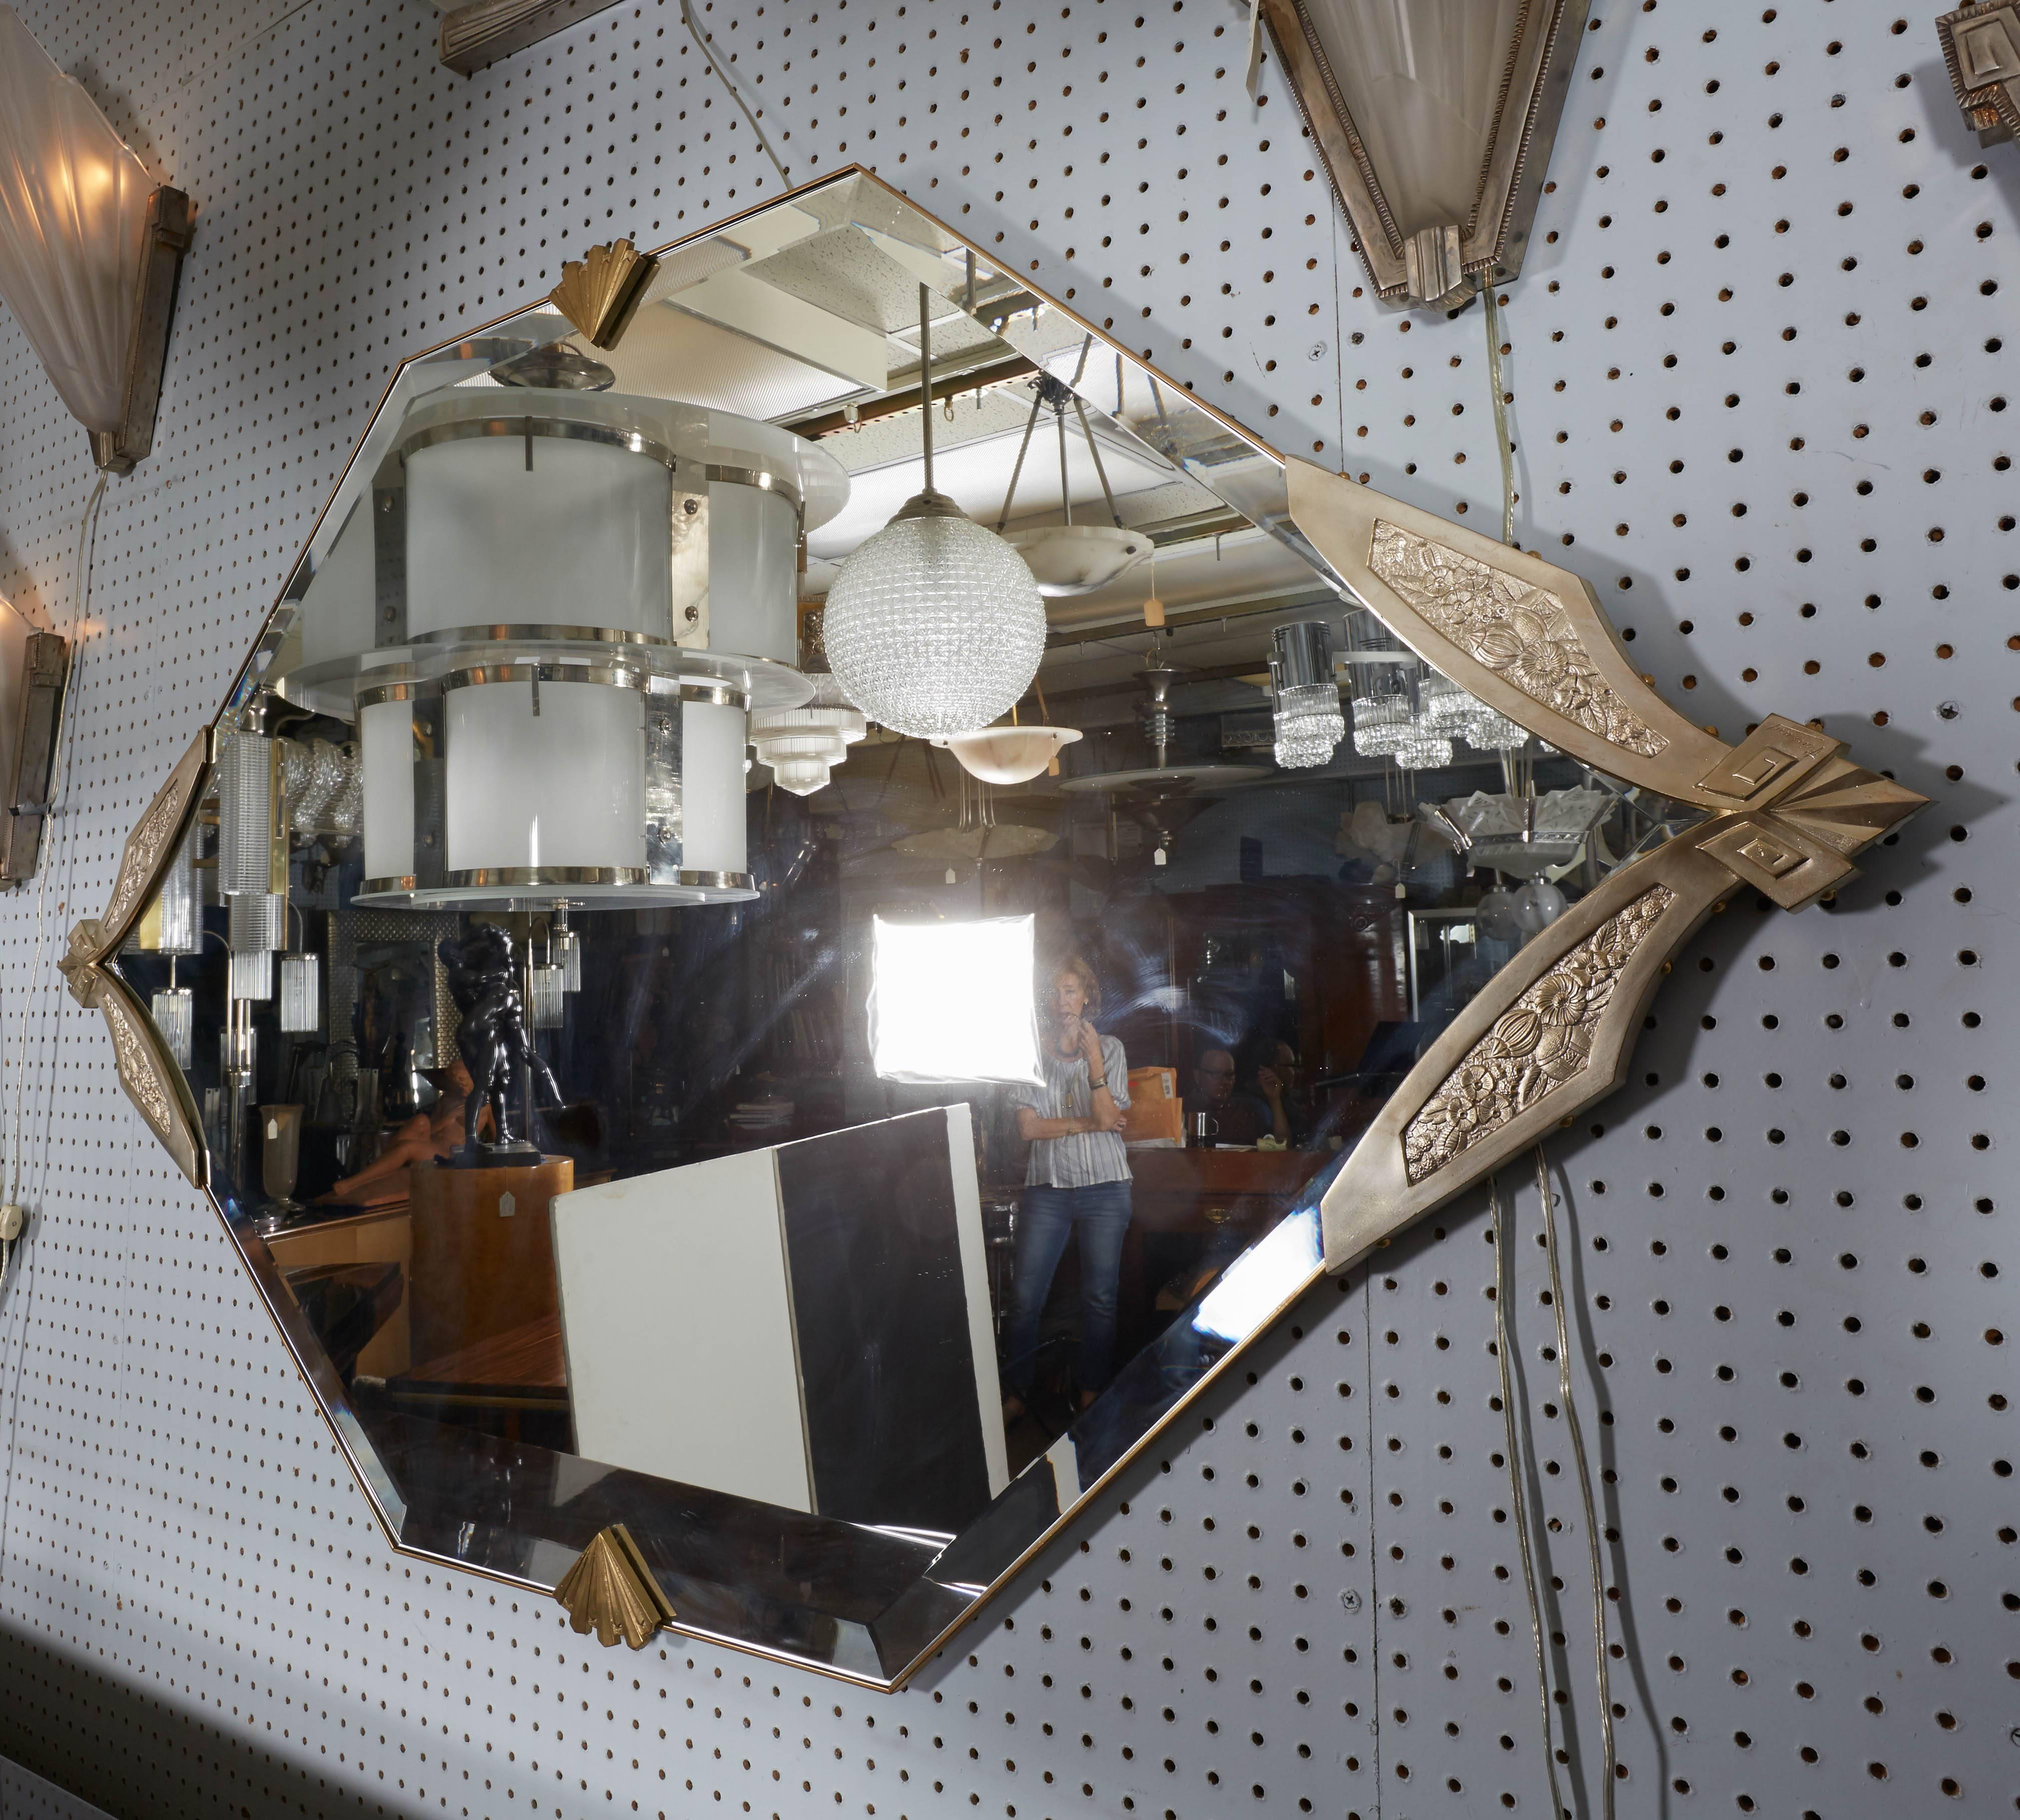 20th Century Very Large French Art Deco Diamond Shaped Mirror, White Gold over Bronze Finish